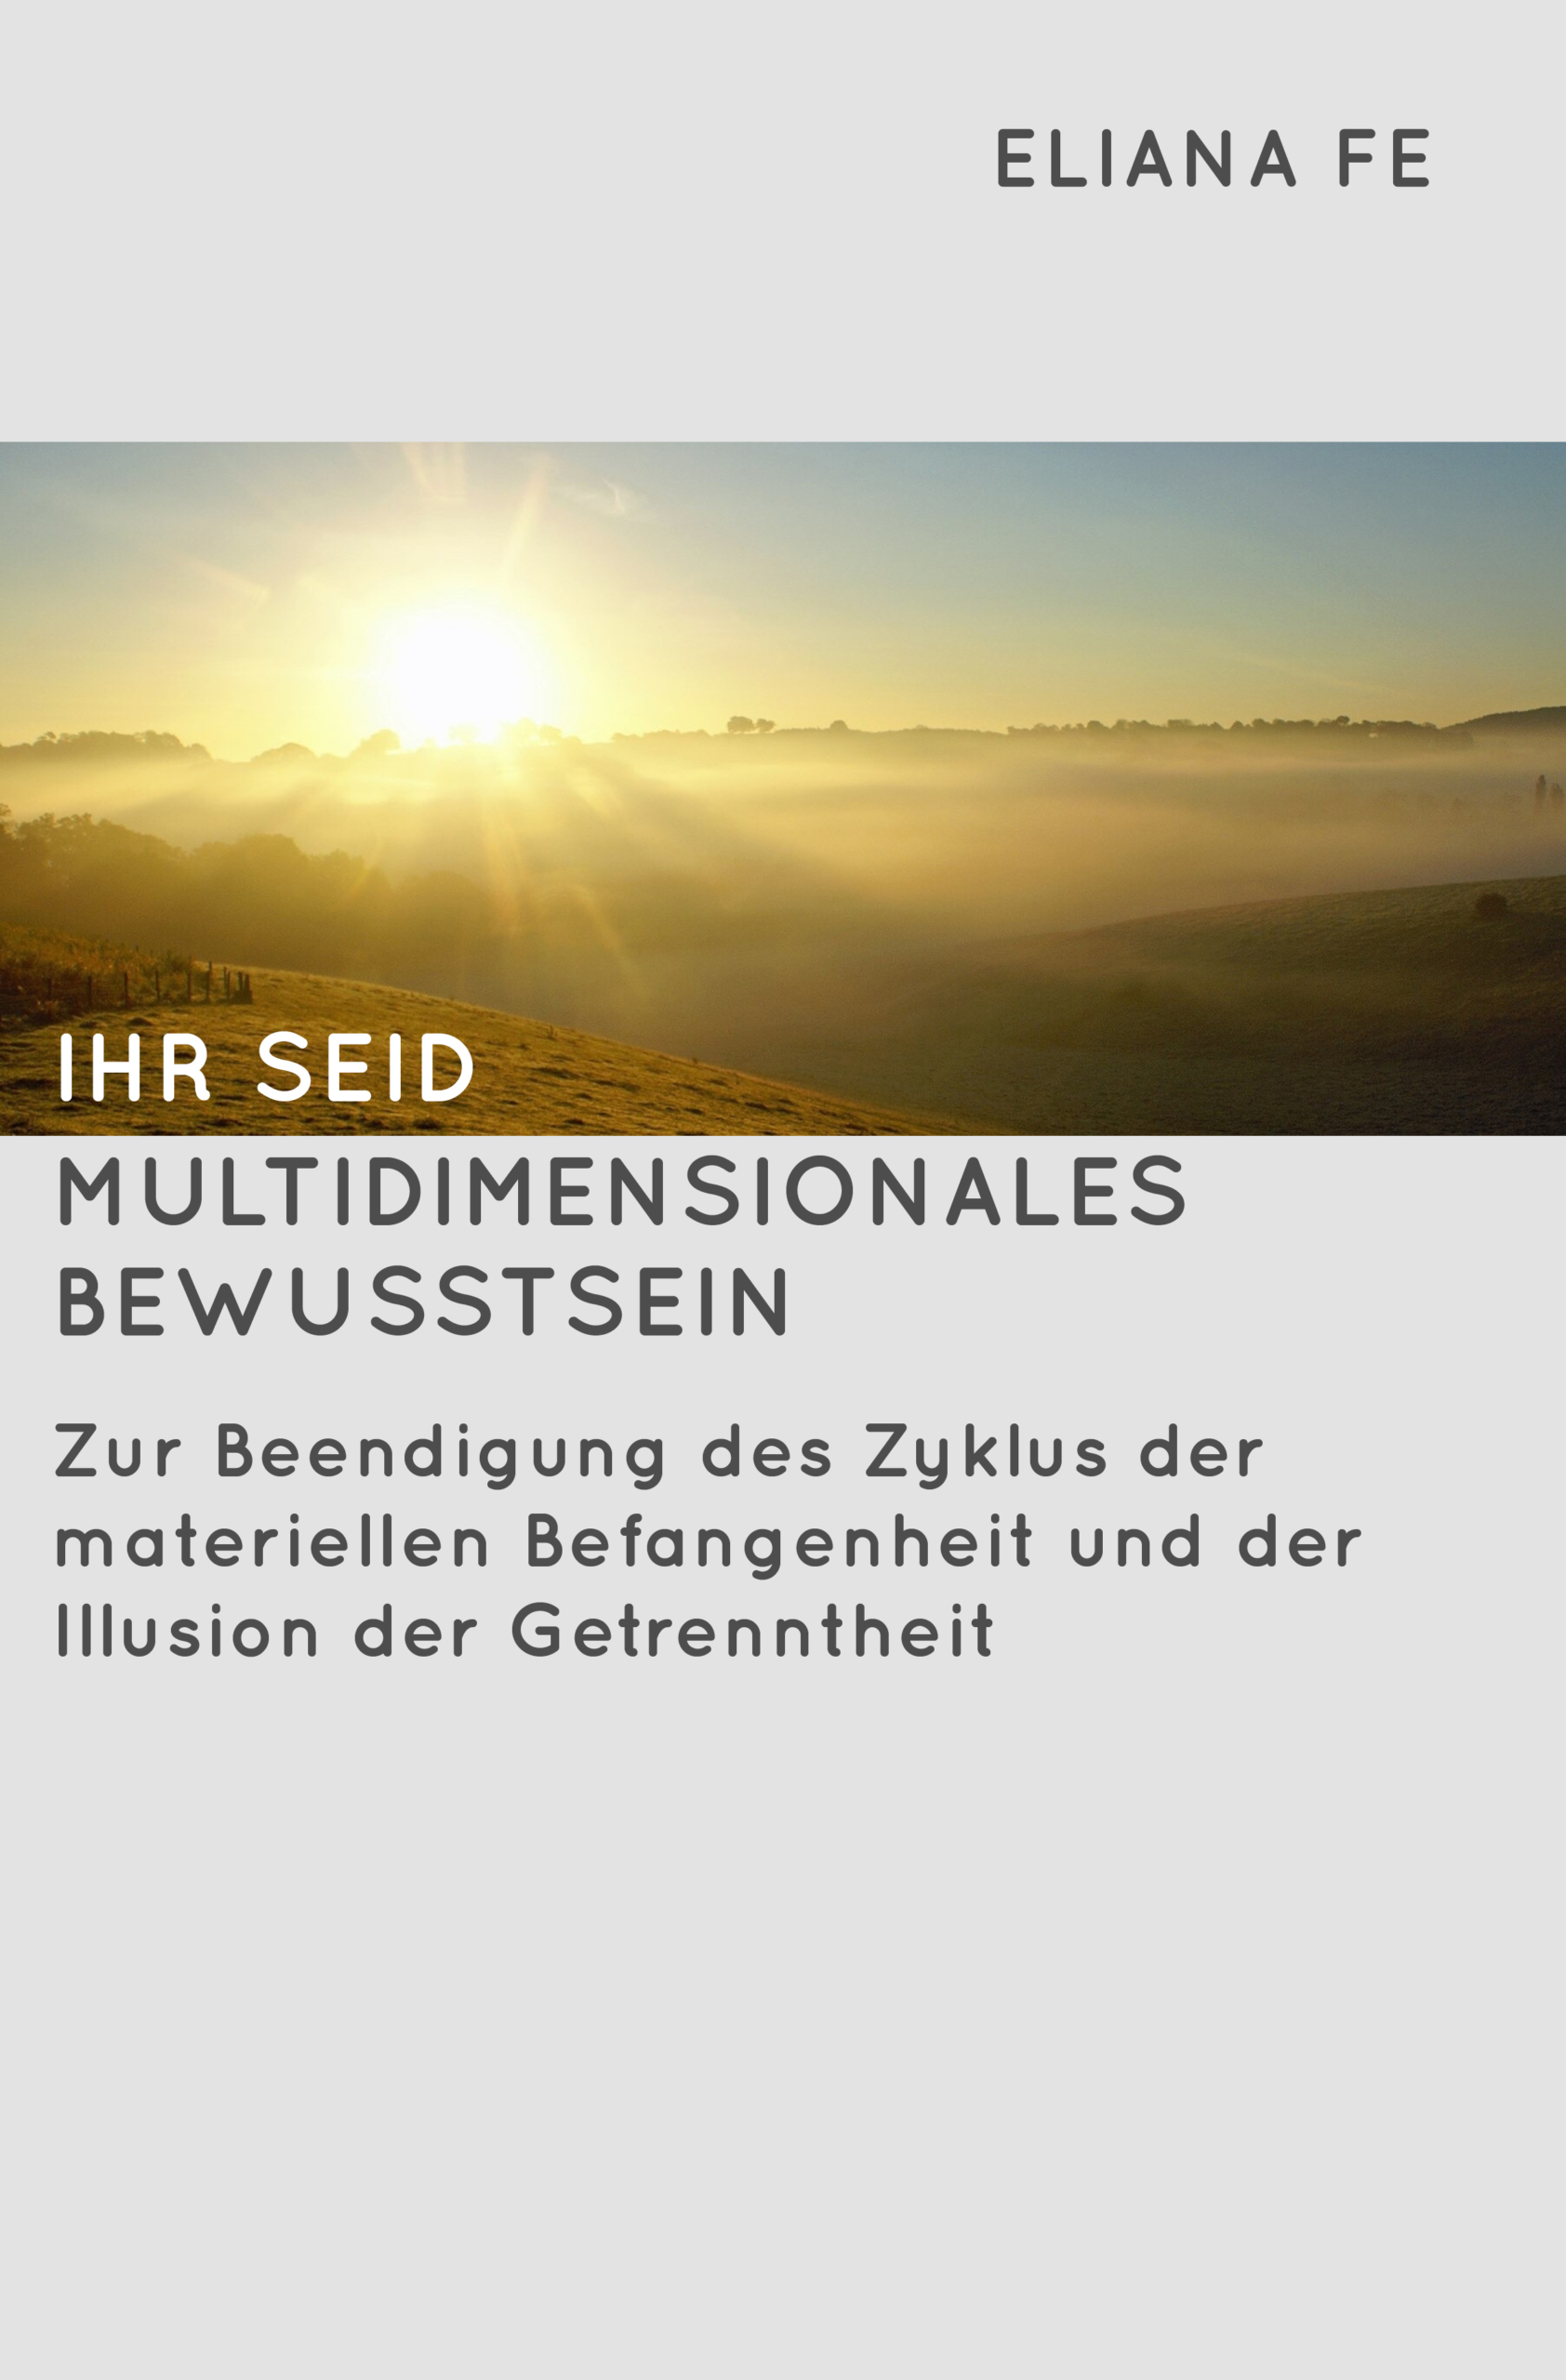 Cover of the Book 'Ihr seid multidimensionales Bewusstsein' by Eliana Fe